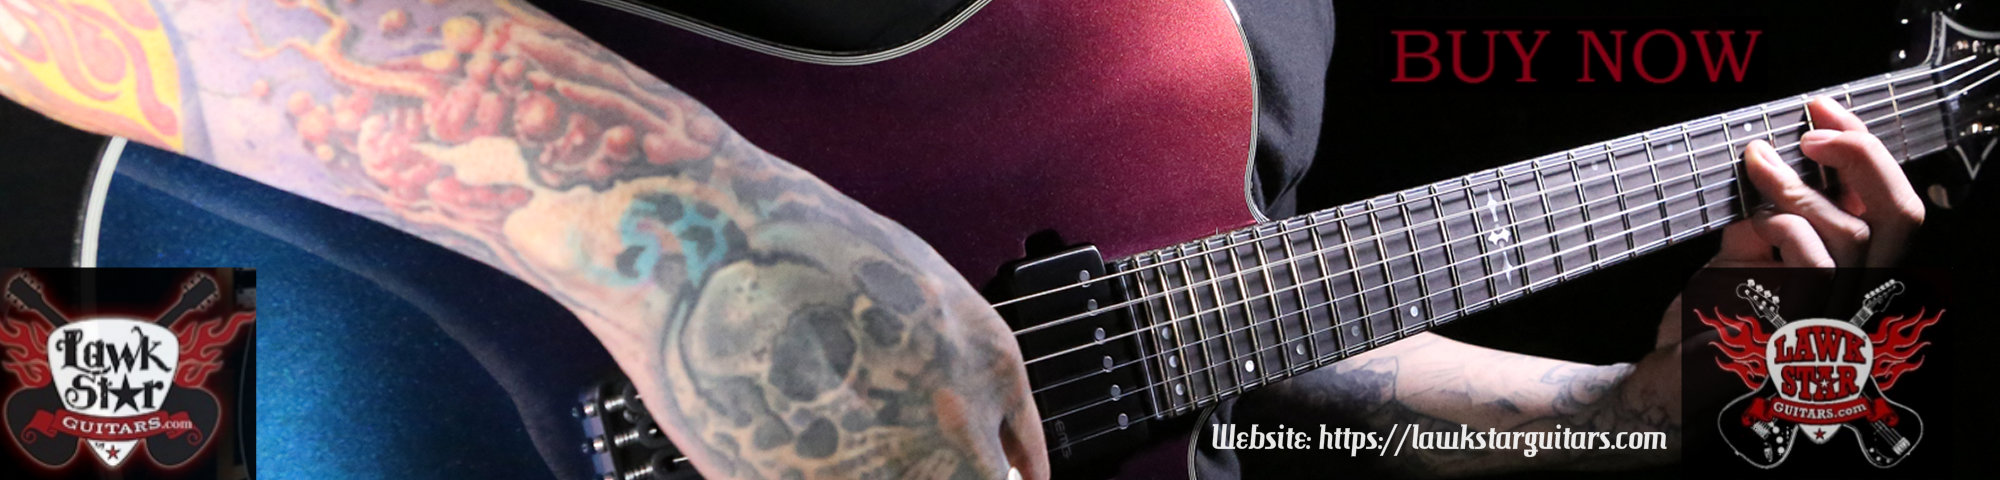 SCHECTER GUITARS: EVERYTHING YOU NEED TO KNOW